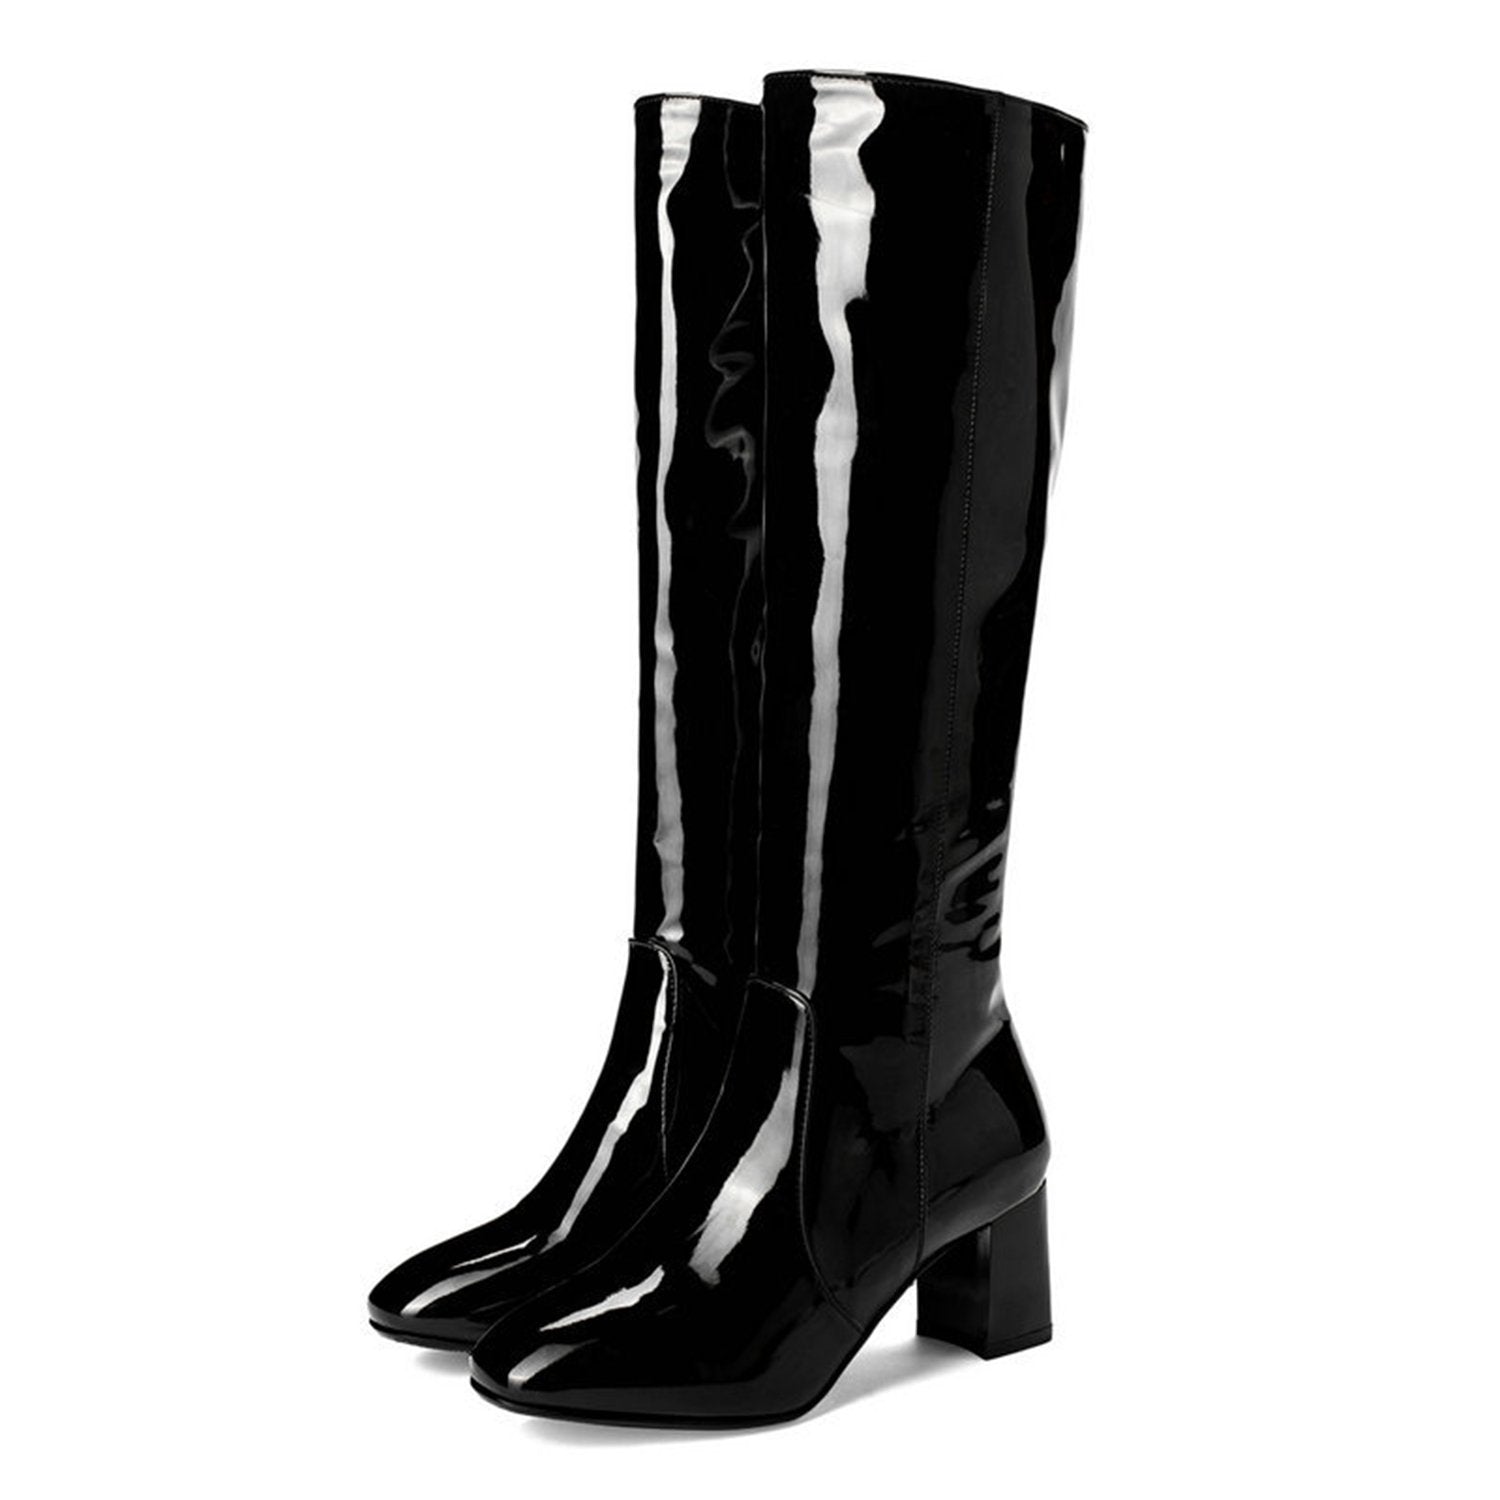 Patent-leather-Knee-High-Long-boots